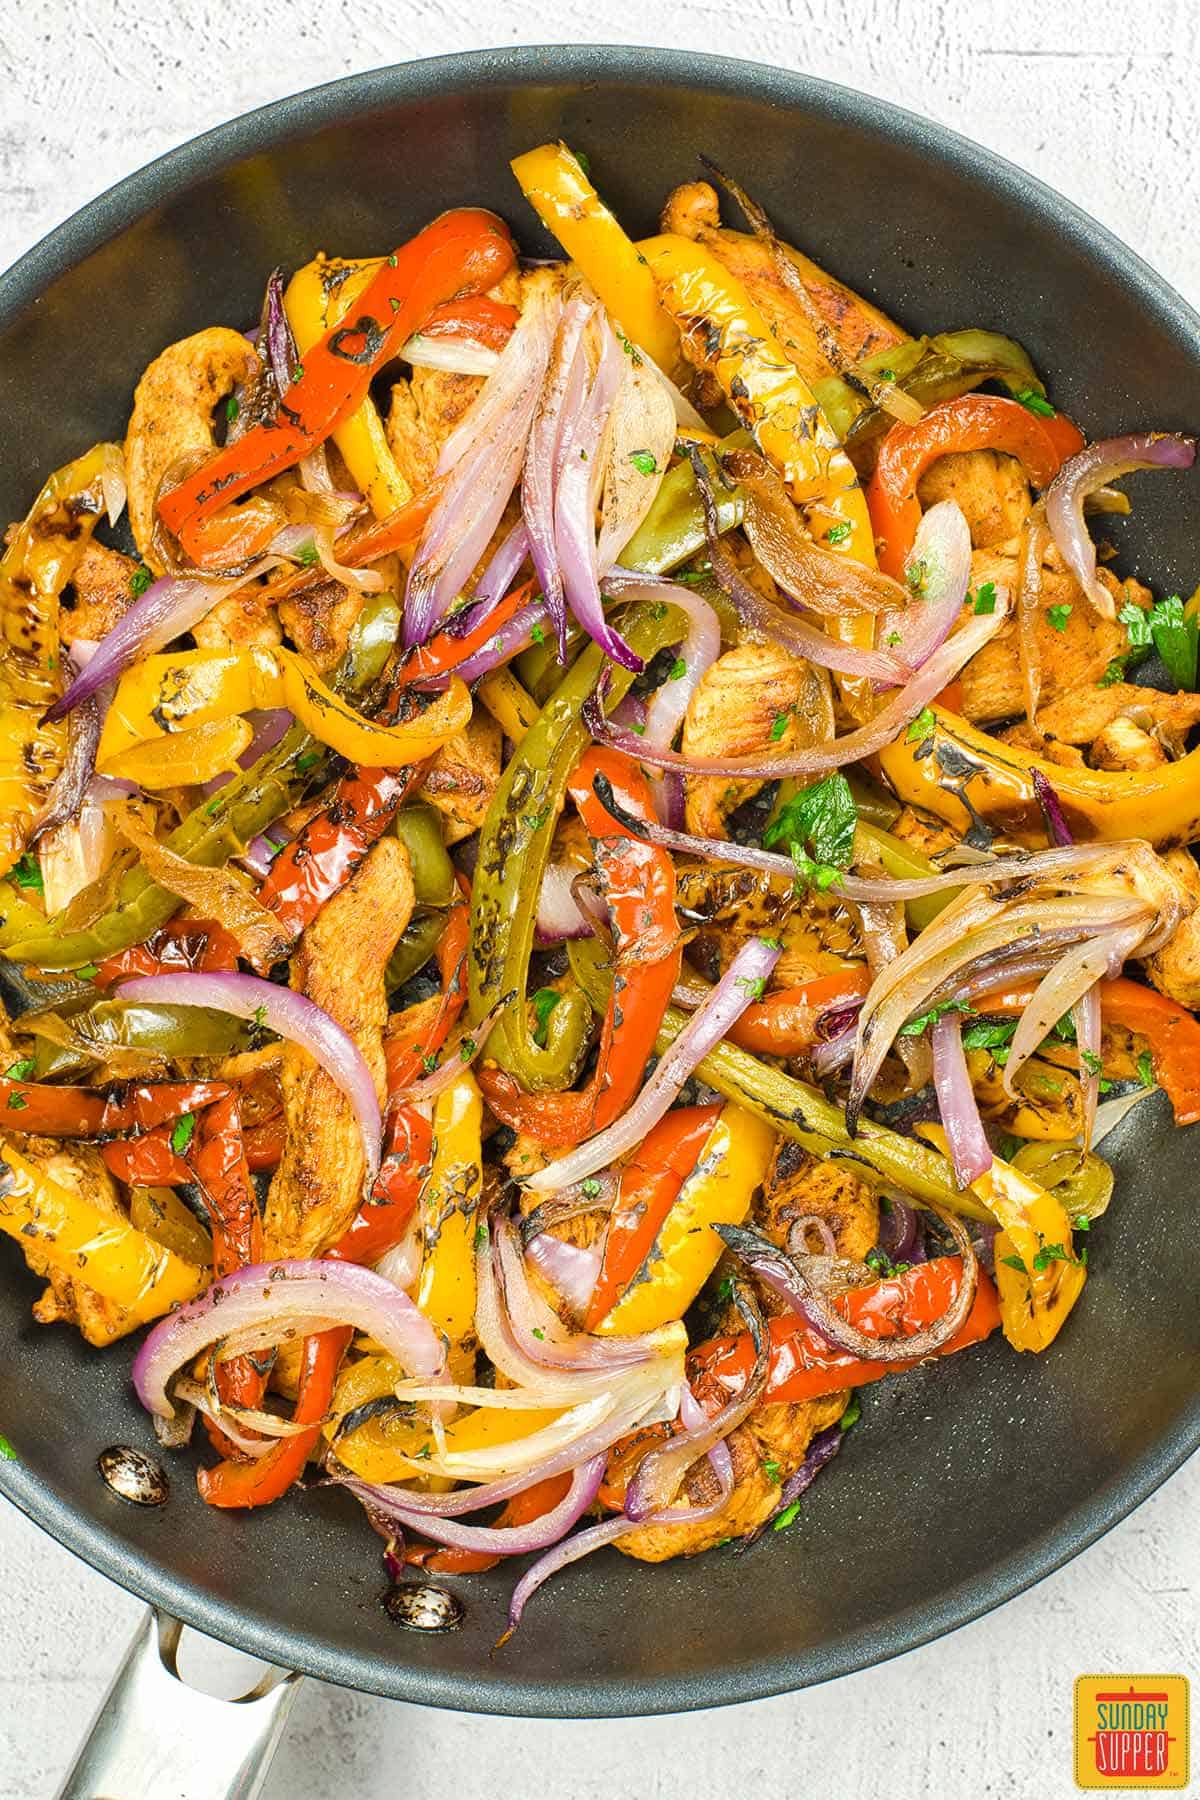 completed chicken fajitas in a pan with a cilantro garnish